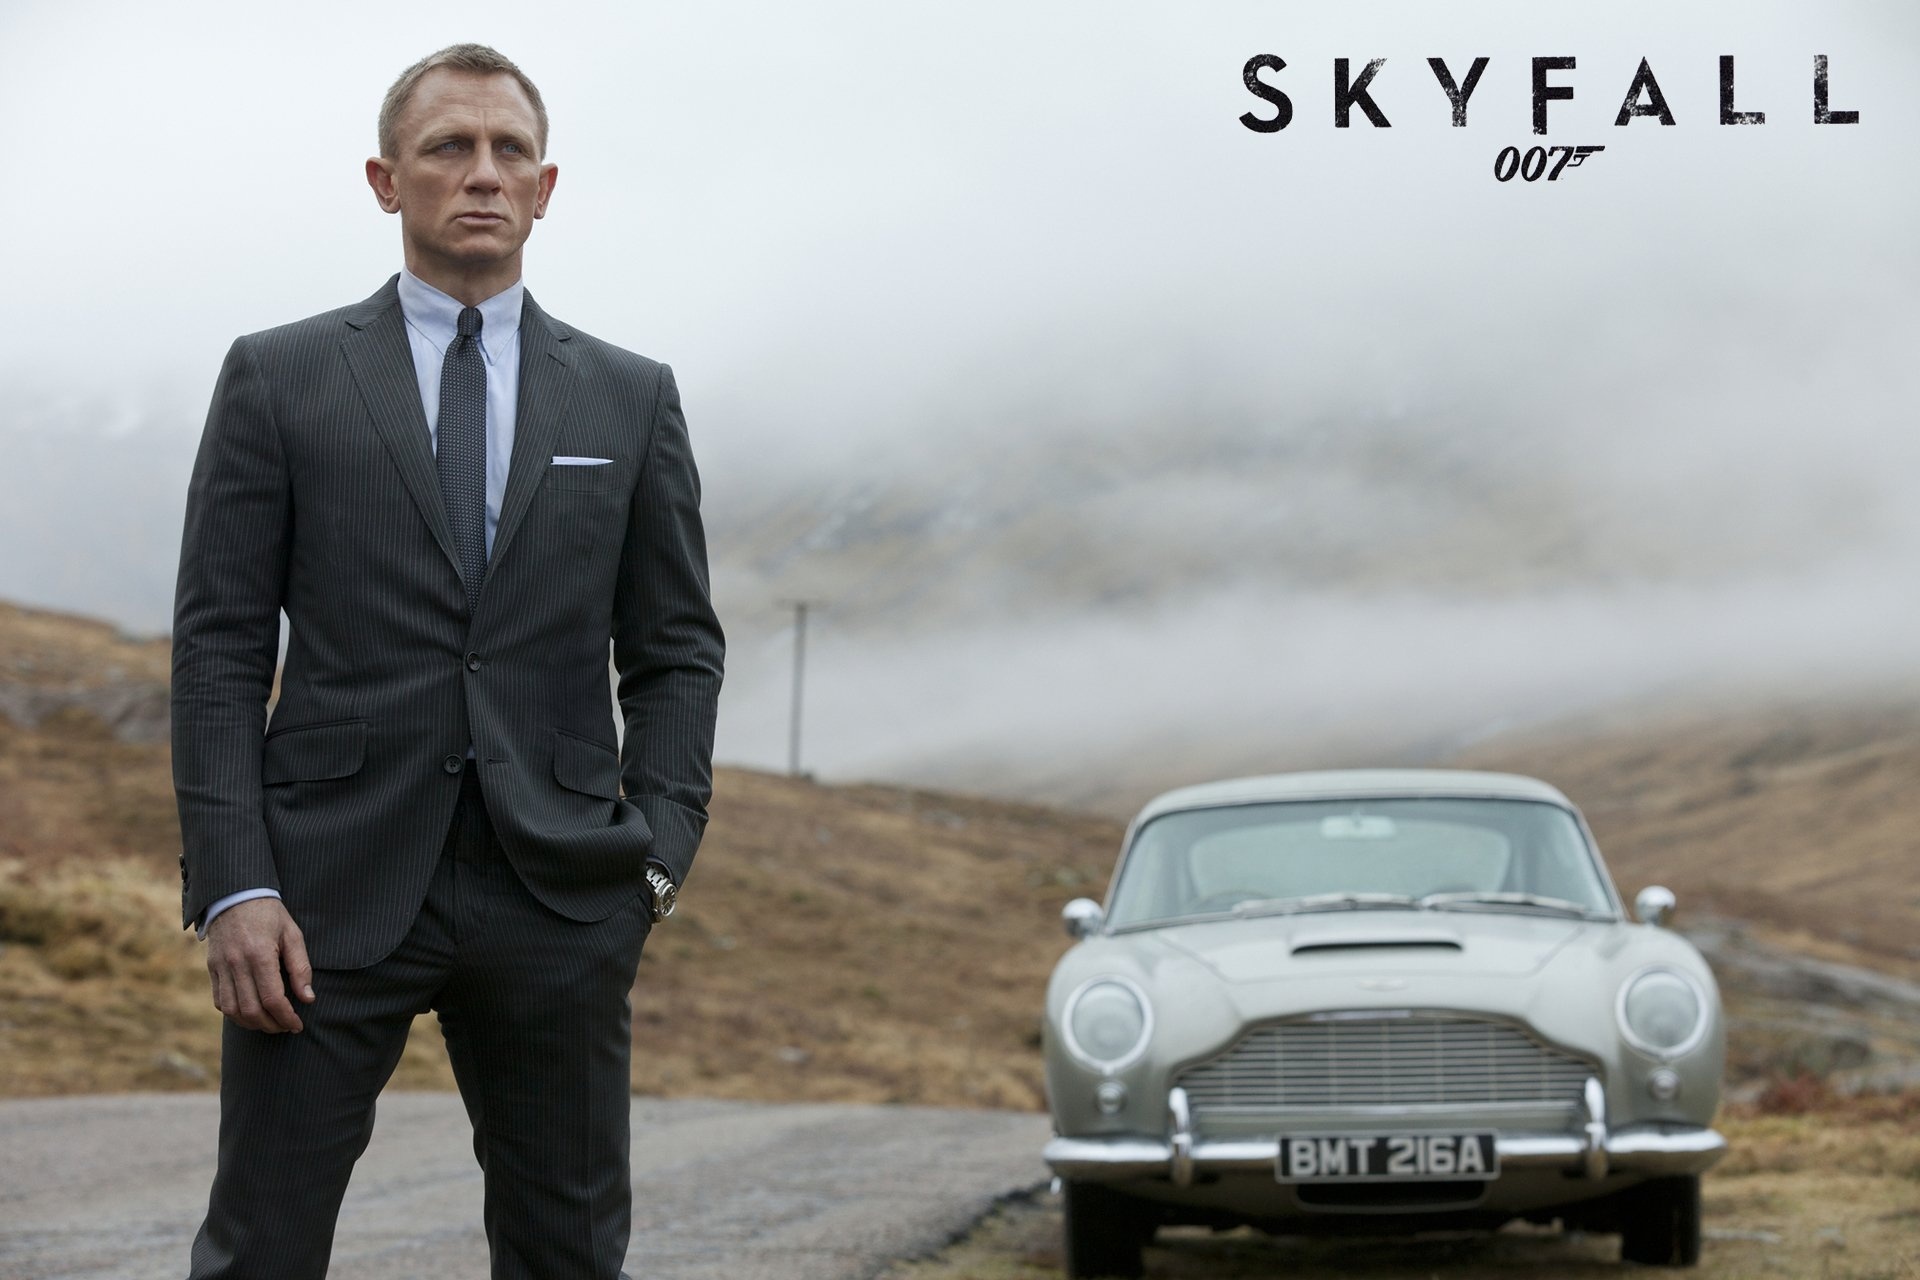 Skyfall: Bond film, Premiered at the Royal Albert Hall on 23 October 2012. 1920x1280 HD Background.